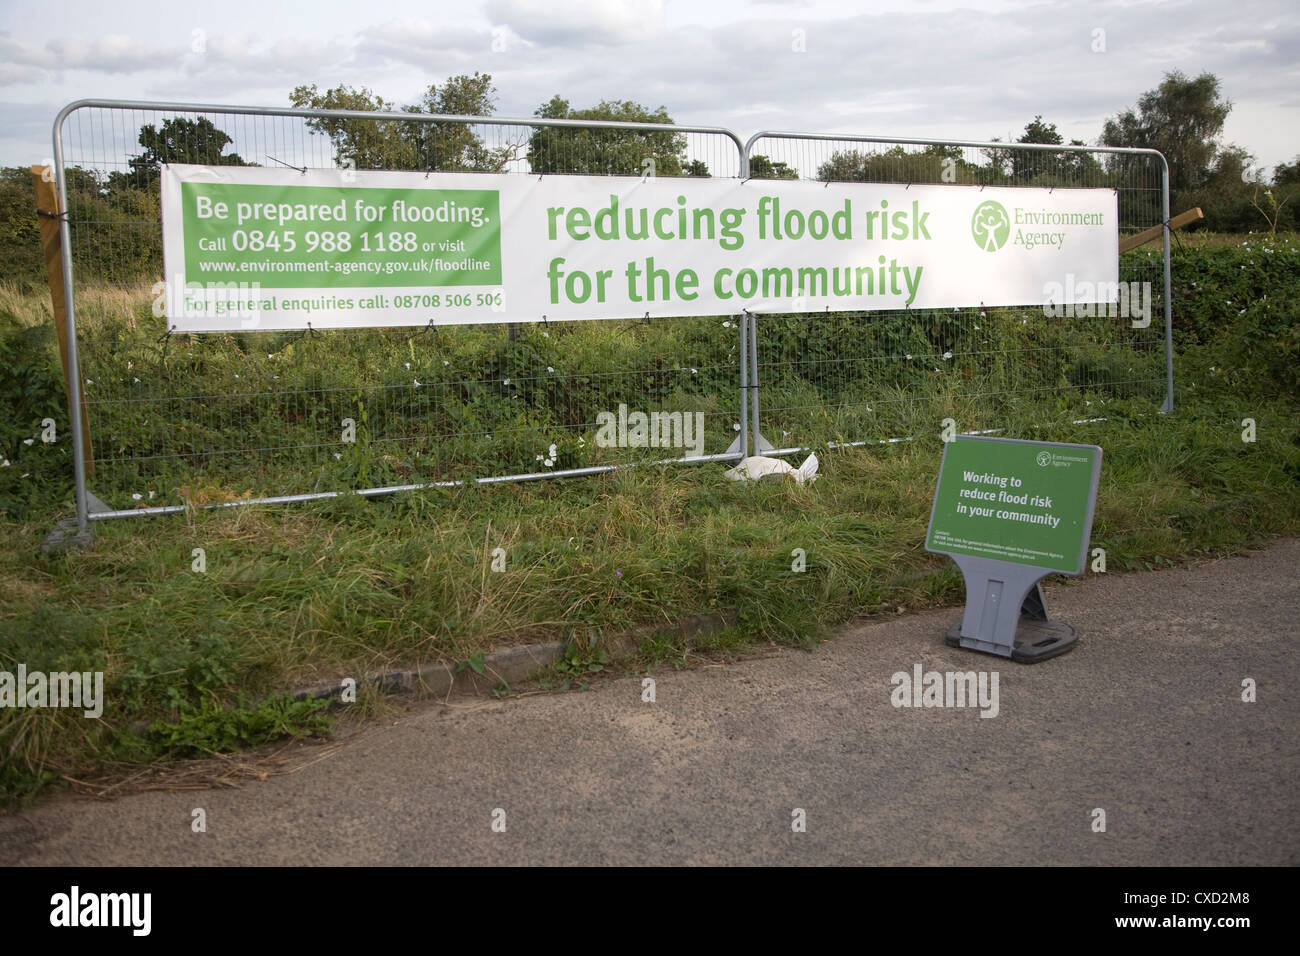 Environment Agency banner reducing flood risk Chillesford Suffolk England Stock Photo